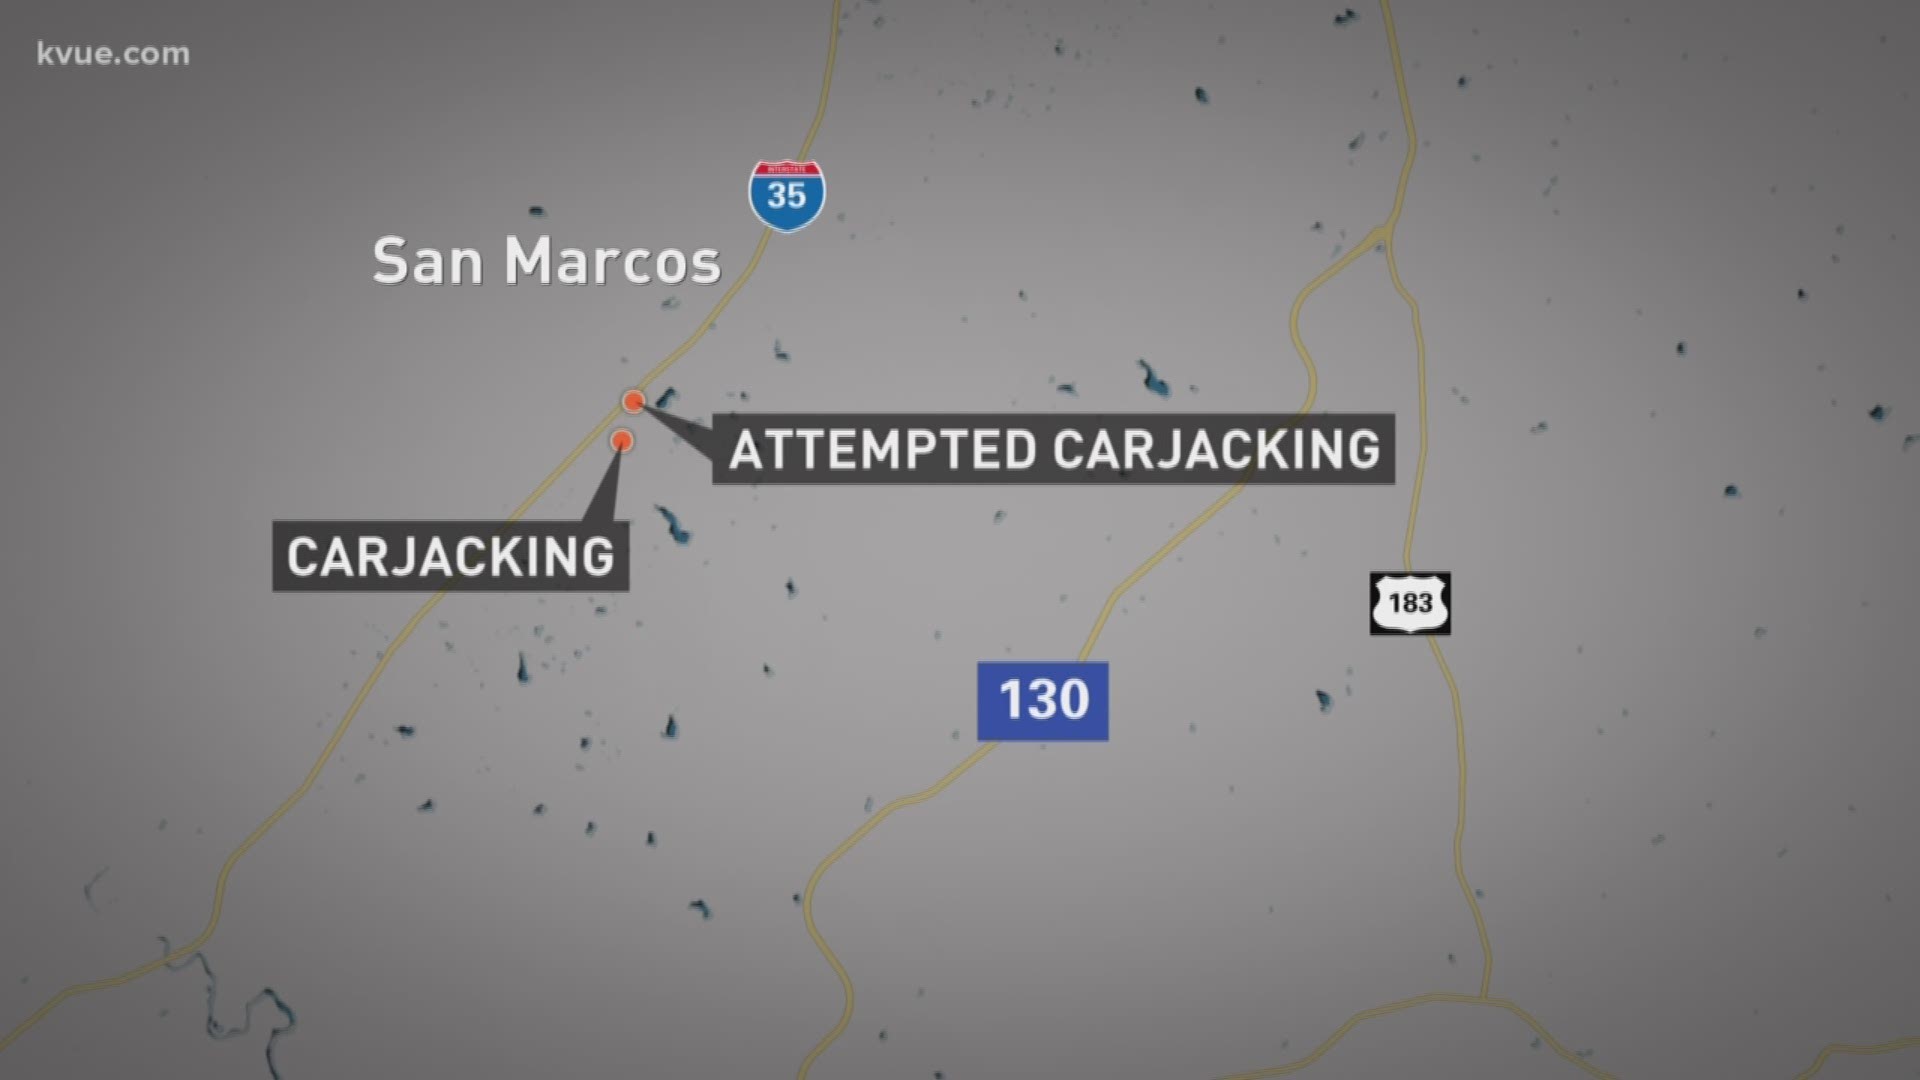 Police in San Marcos are looking for suspects they believe may be responsible for an attempted carjacking on Monday and a carjacking last month.